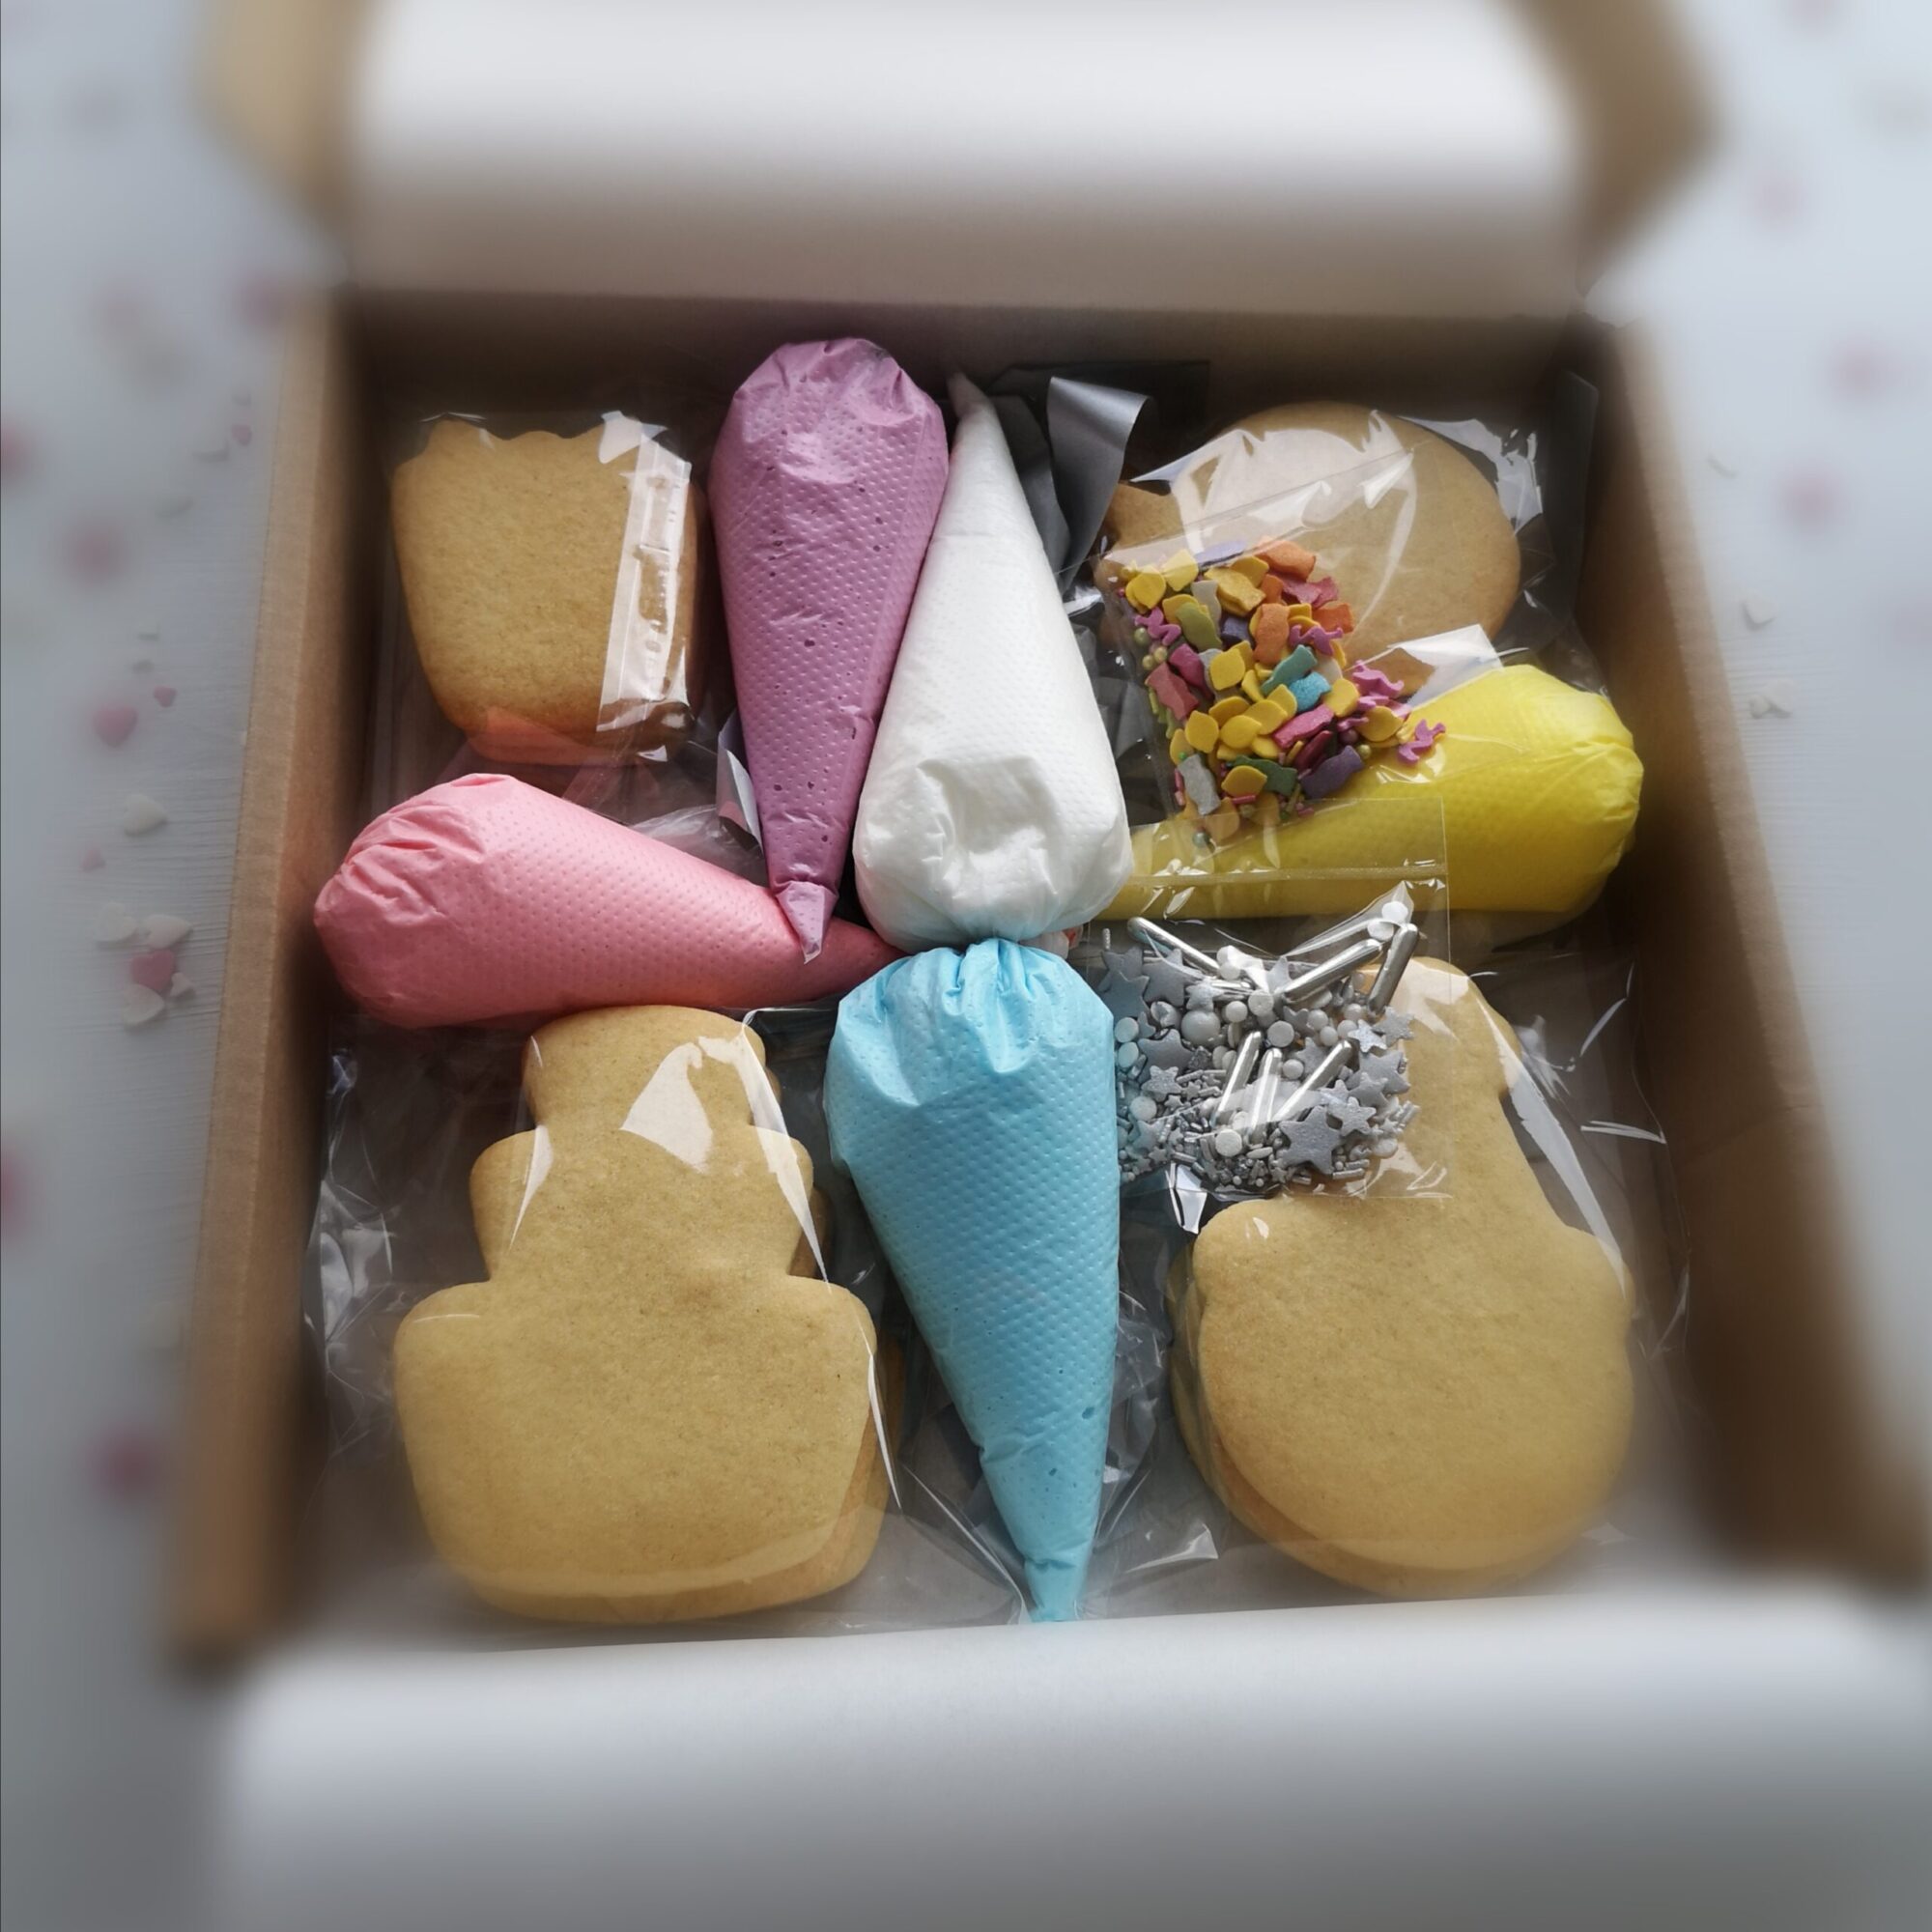 Example of a DIY Cookie Decorating Kit